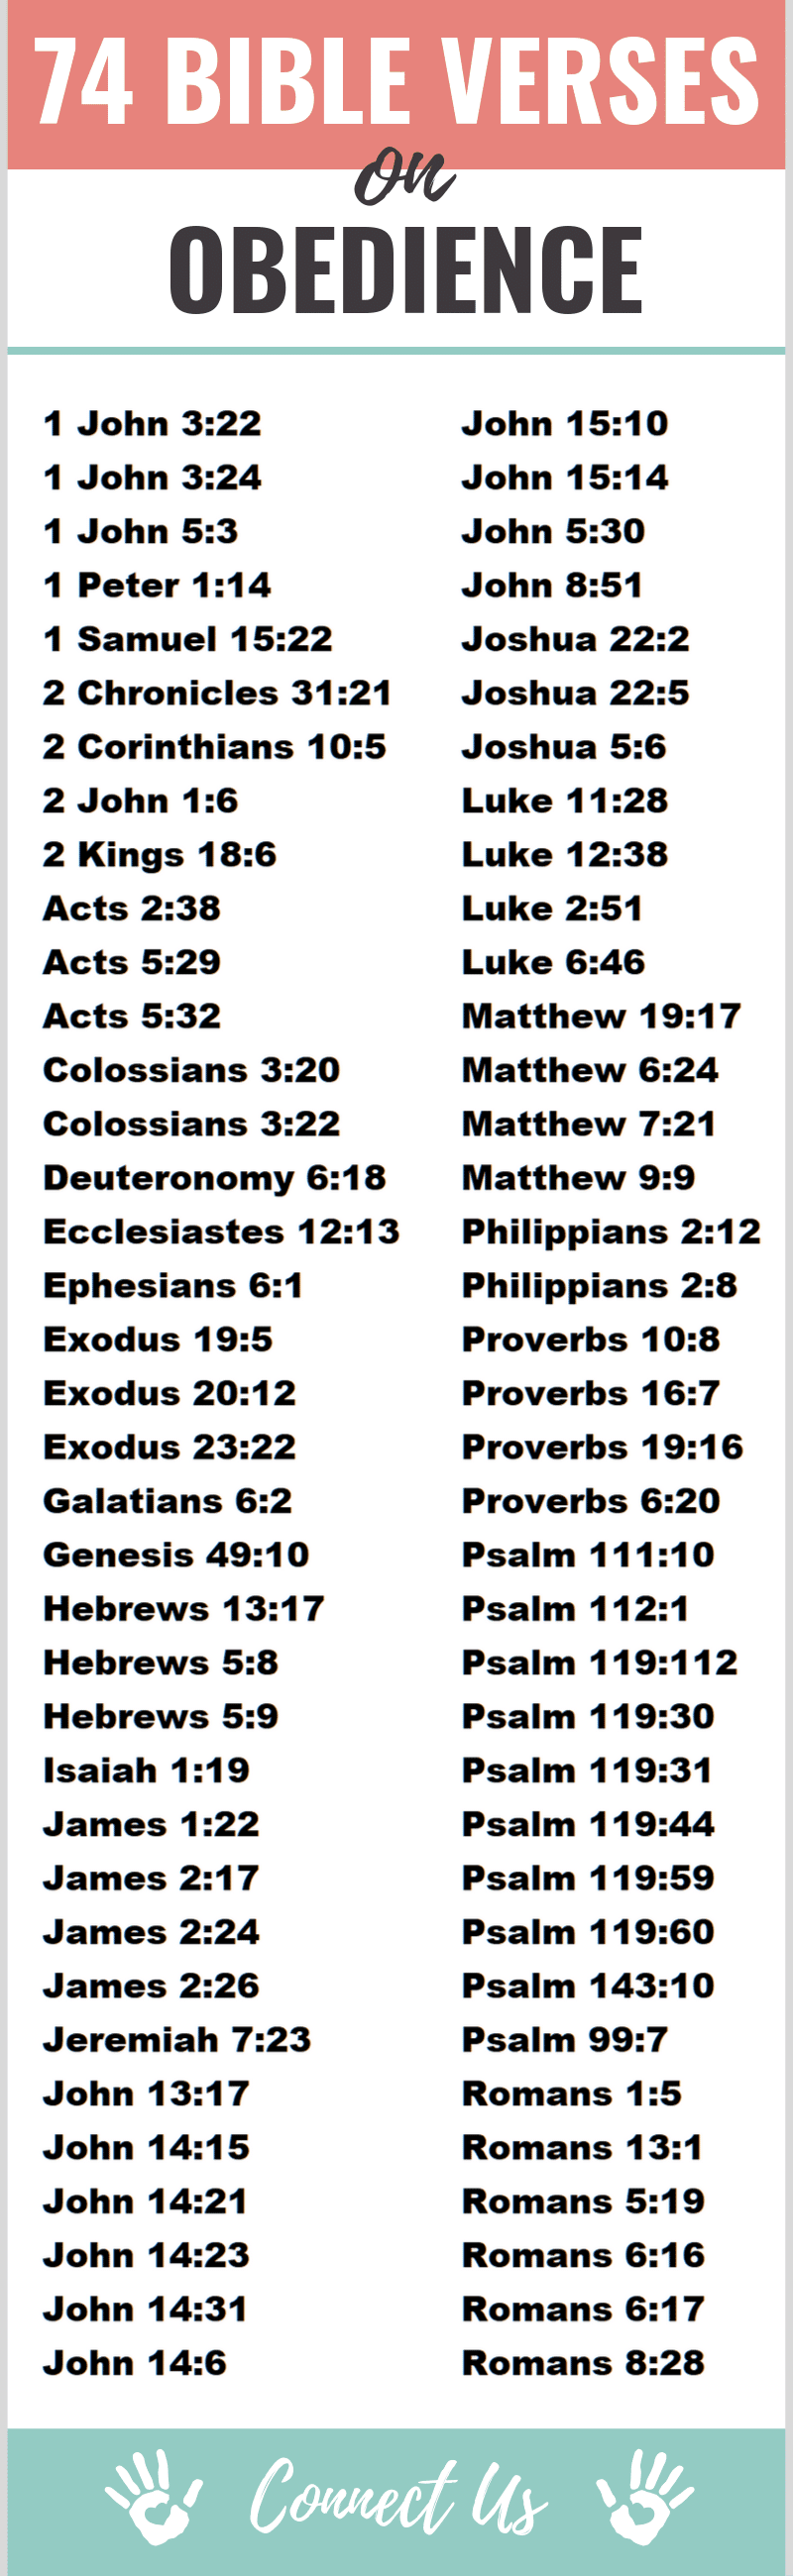 Bible Verses on Obedience